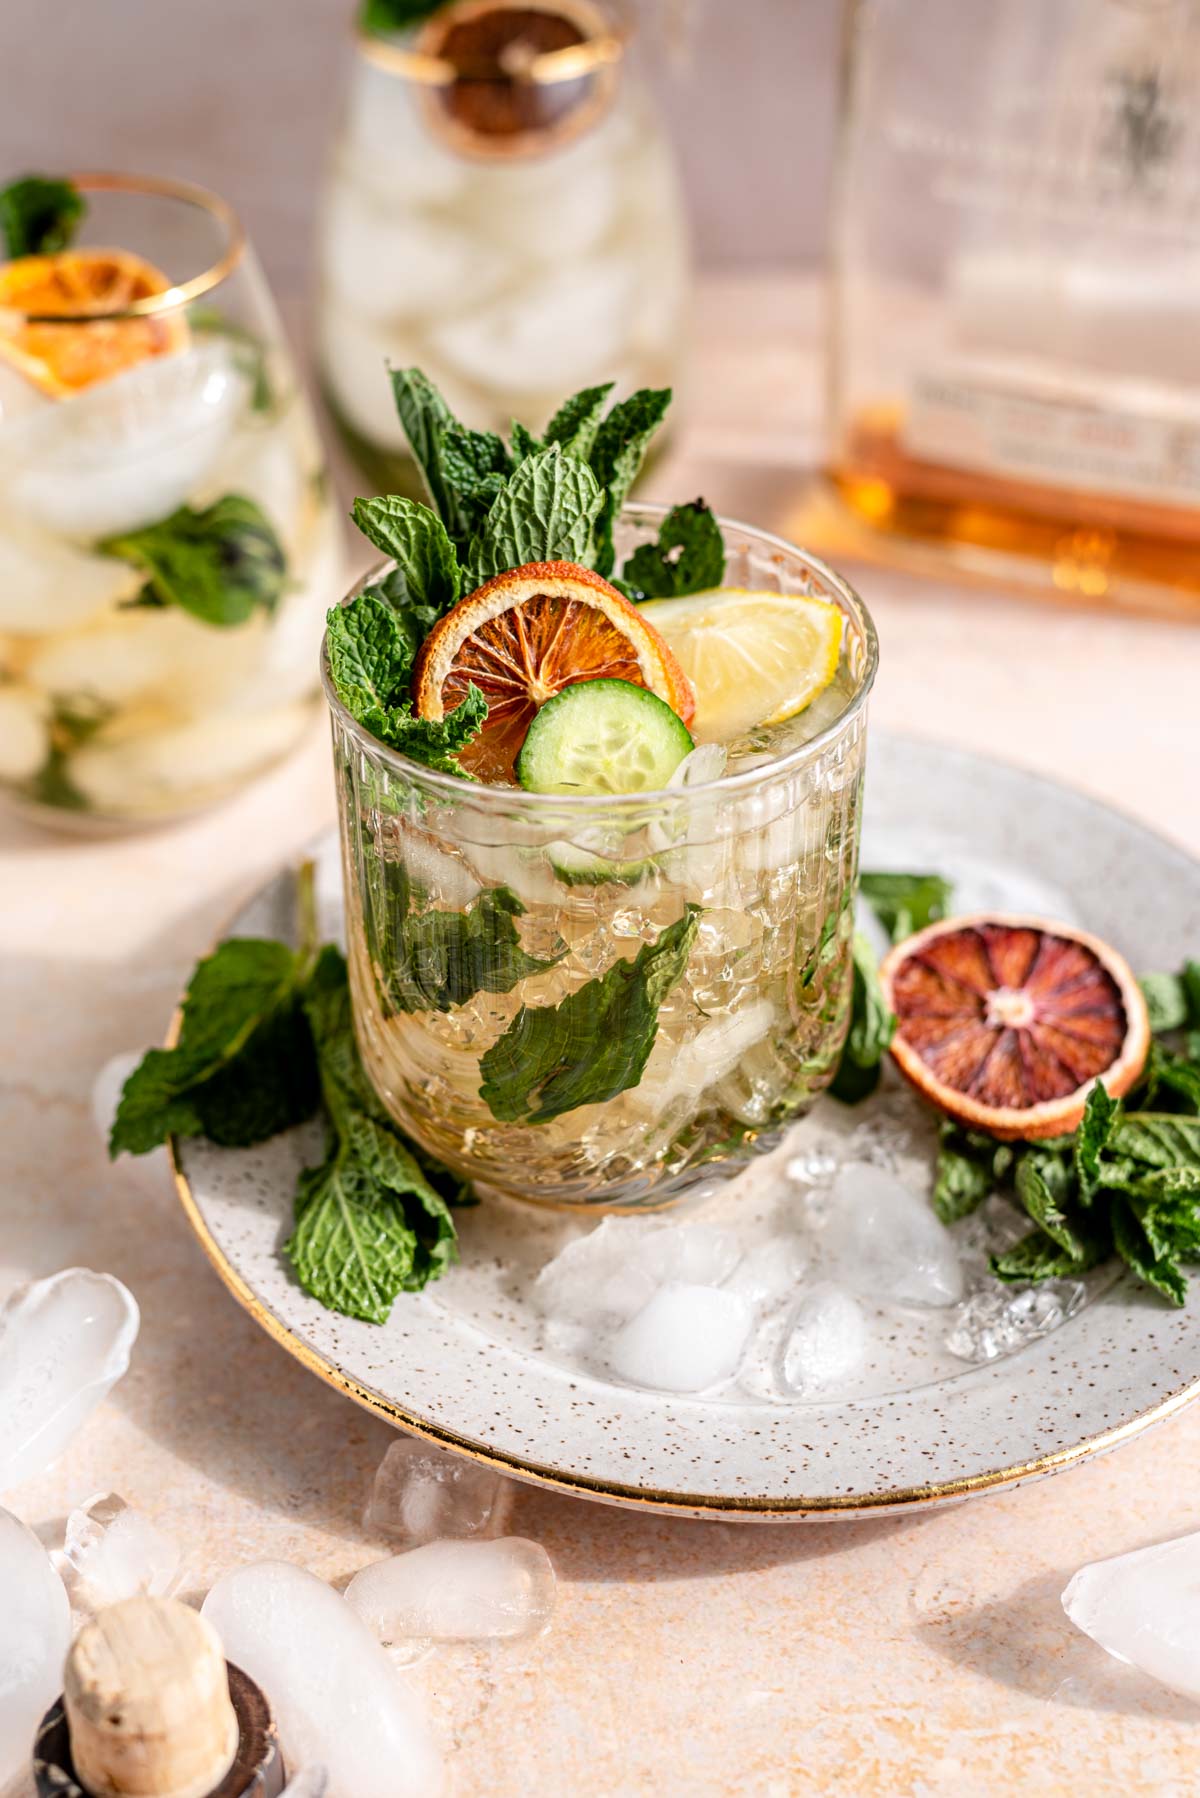 Mint julep in a clear glass surrounded by ice and mint.